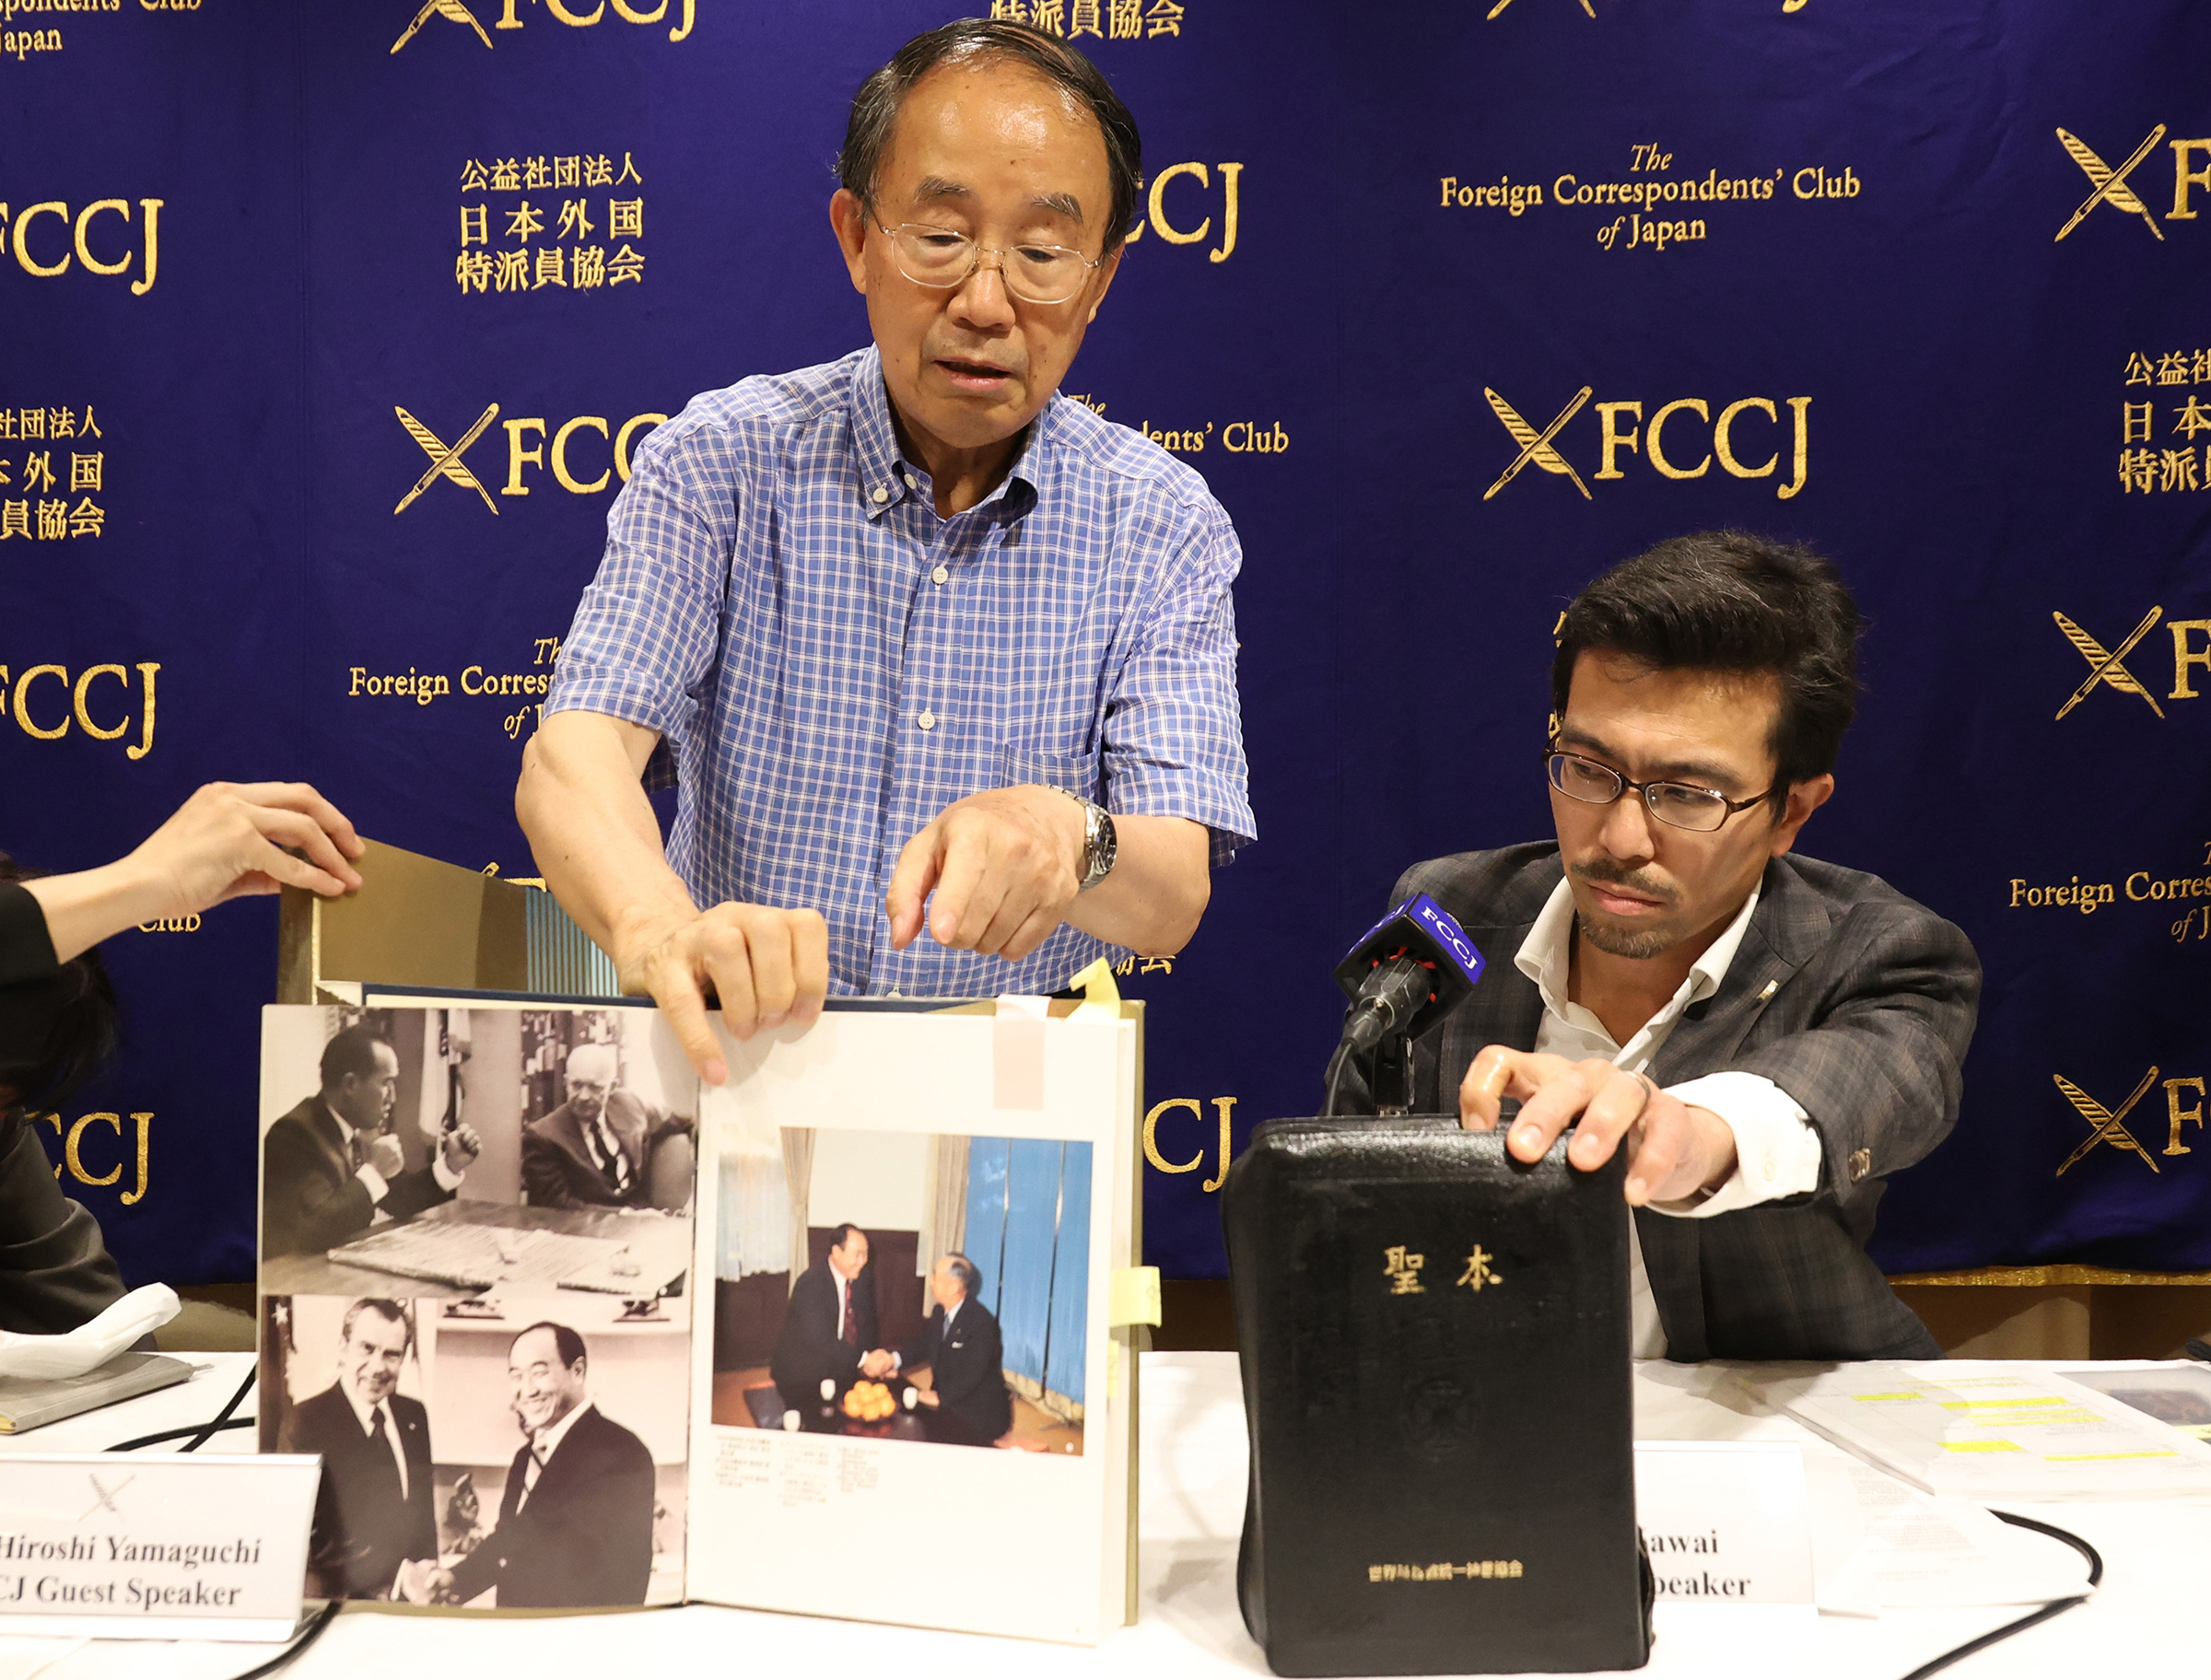 Members of the National Network of Lawyers Against Spiritual Sales, Hiroshi Yamaguchi, left, and Yasuo Kawai, right, display a history book of the Unification Church and the cult's Holy book at a press conference about activities of the Unification Church at the Foreign Correspondents' Club of Japan in Tokyo on July 29, 2022.